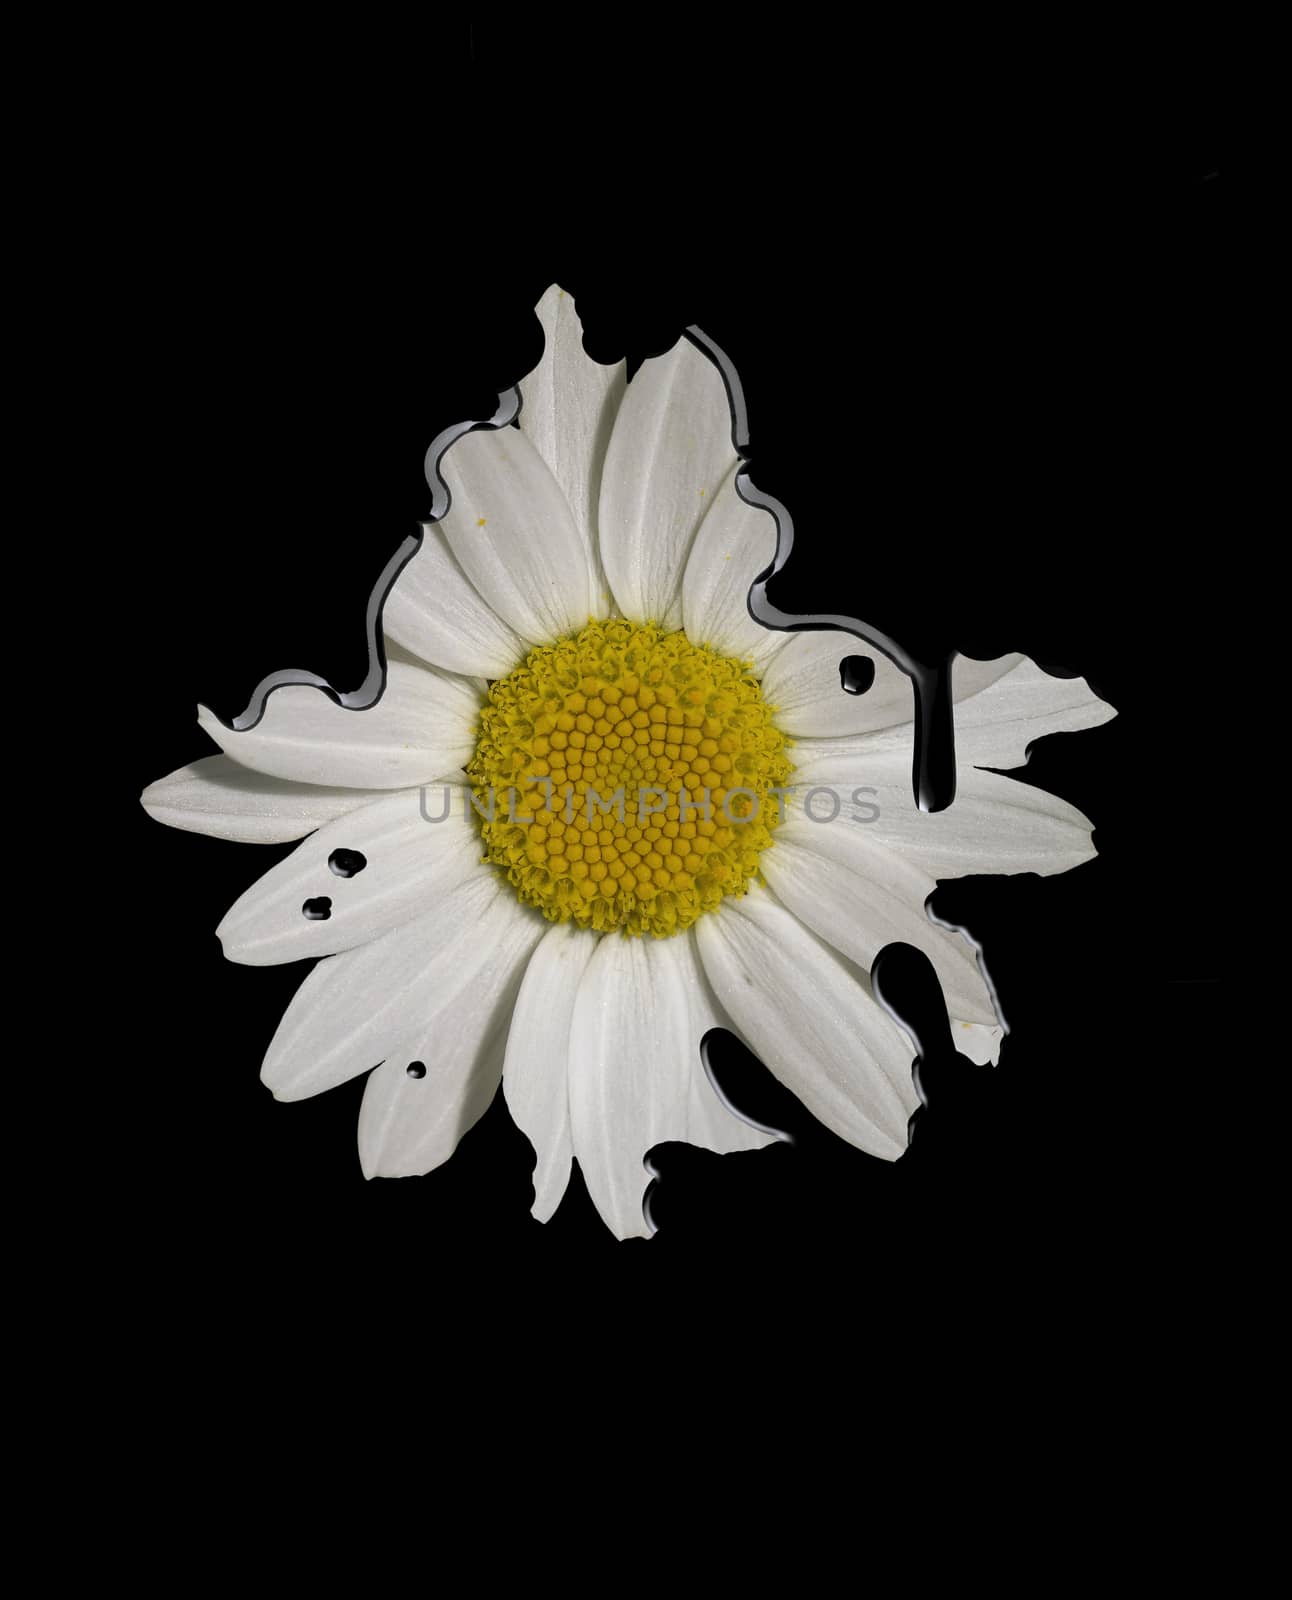 one dirty daisy in black dripping background by sette